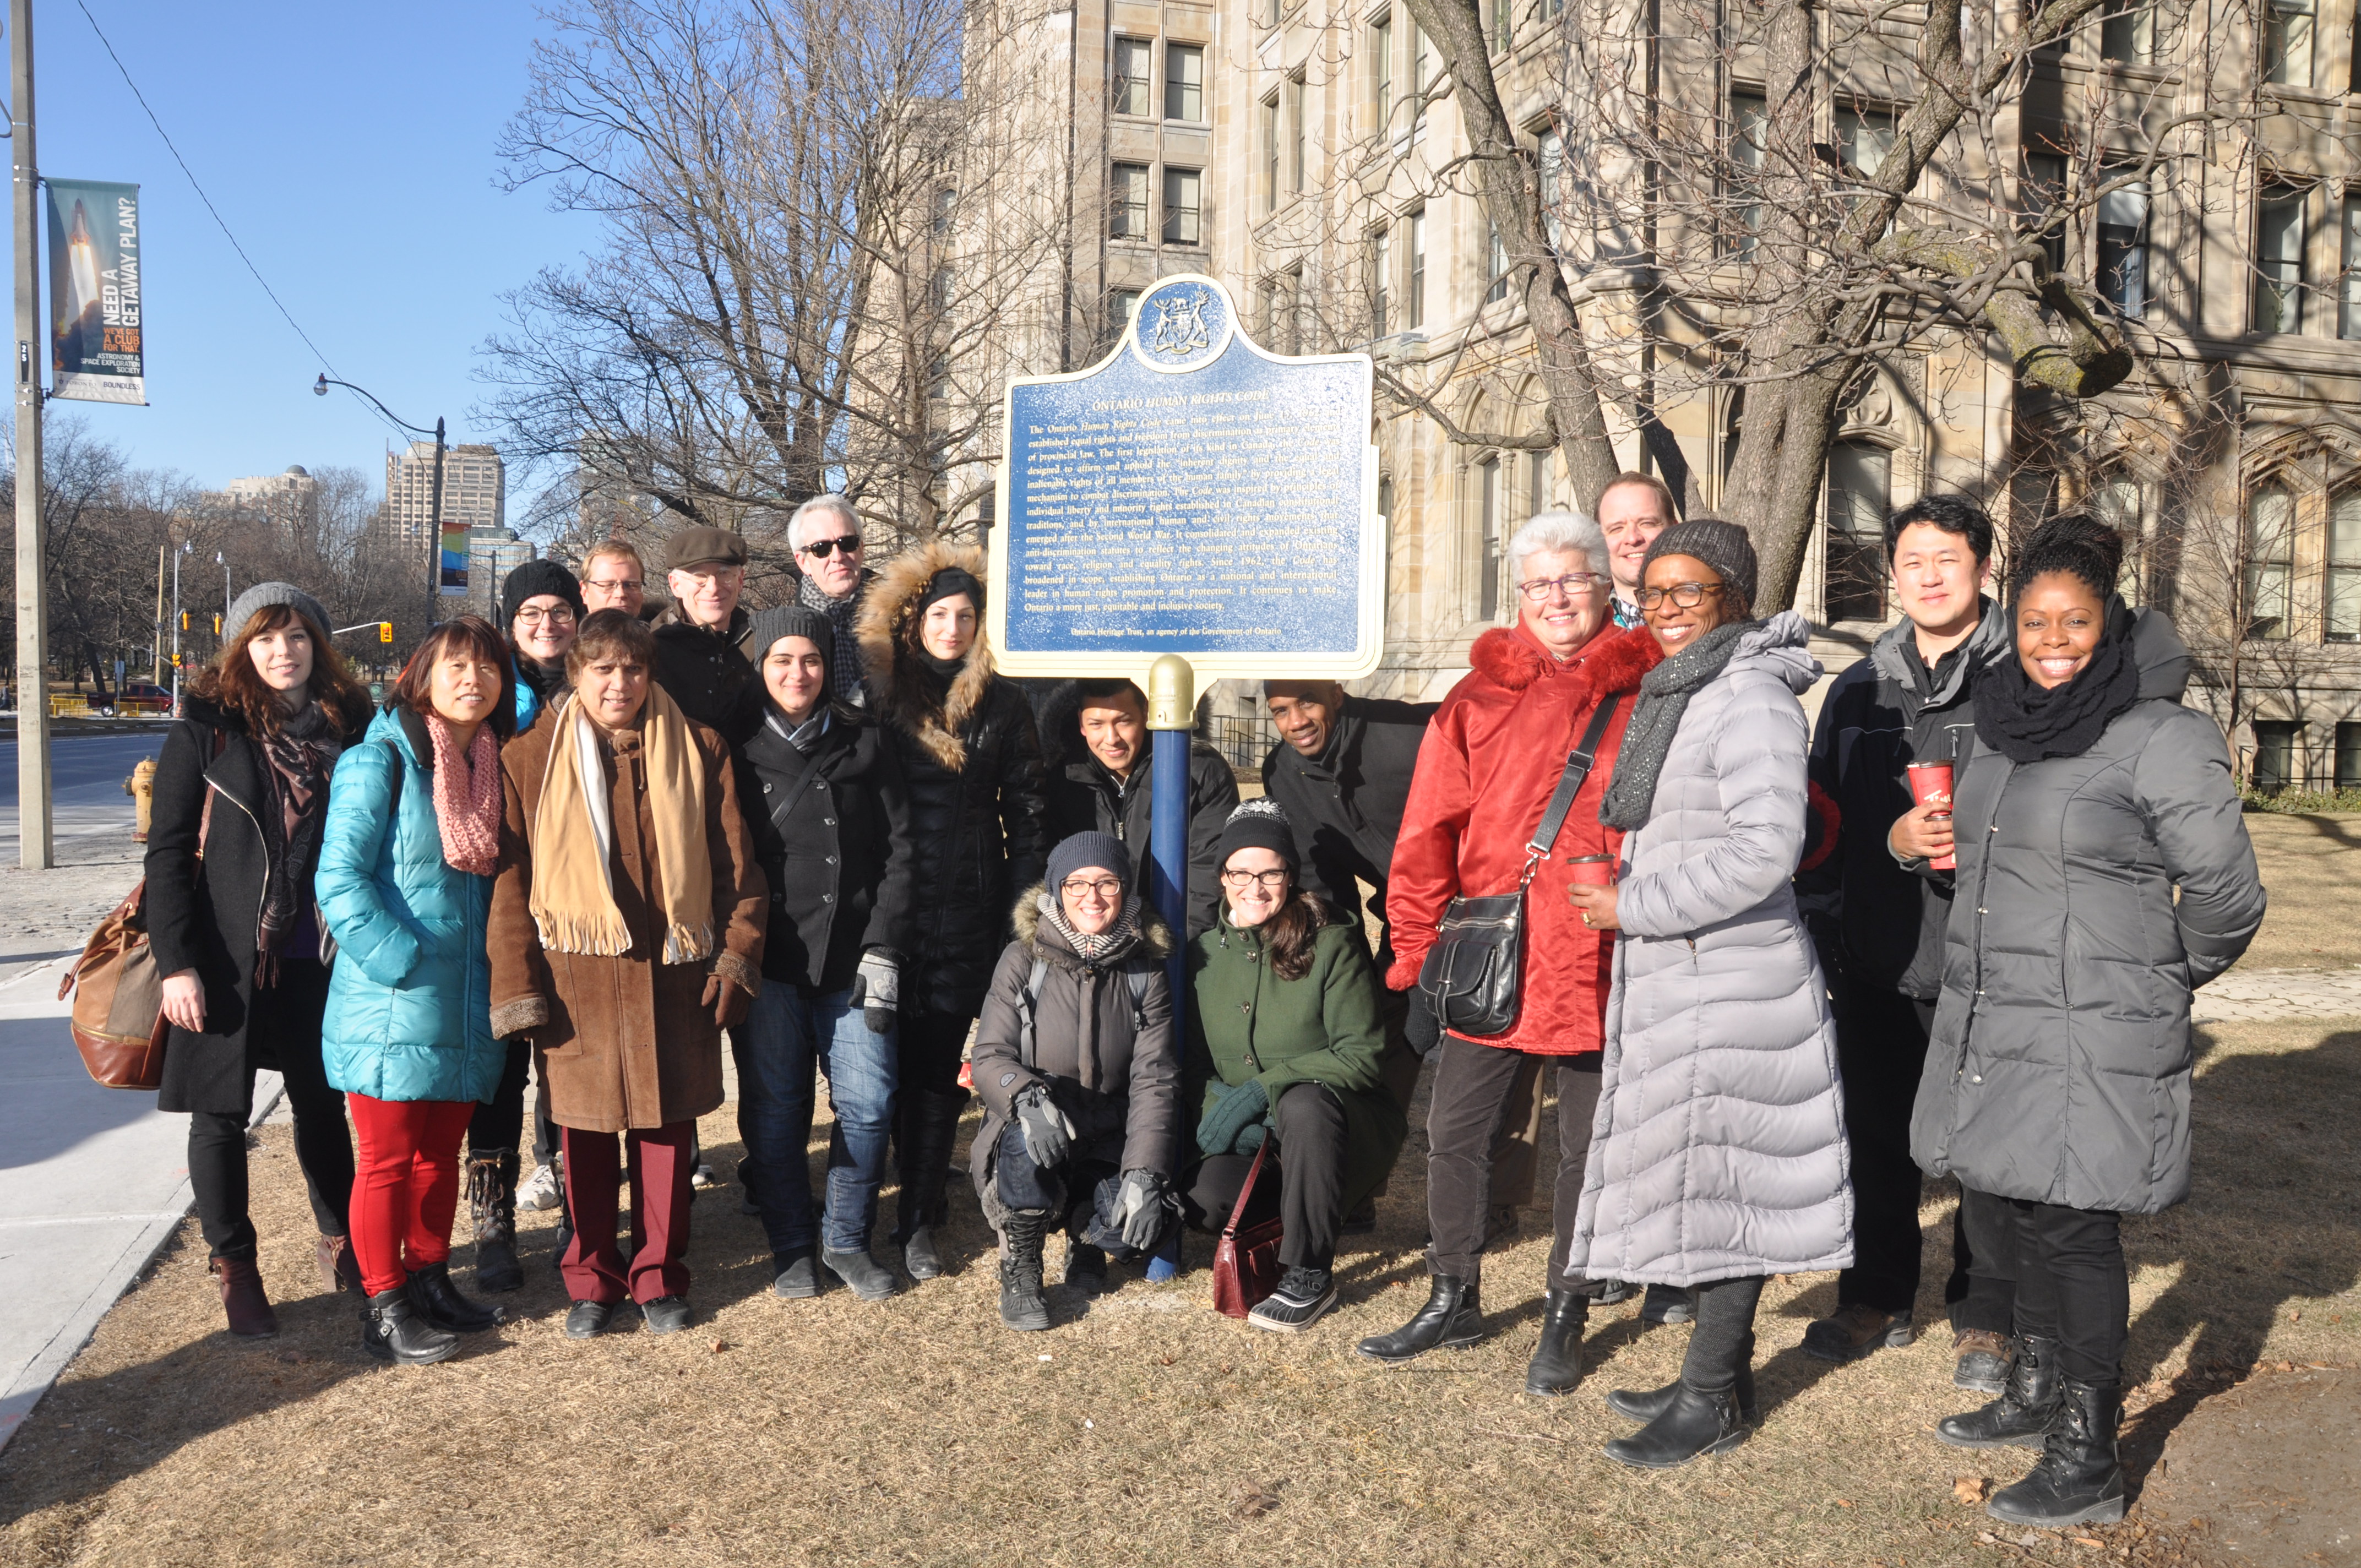 Chief Commissioner Barbara Hall and Executive Director Diane Carter stand with OHRC staff in a semi-circle around the Human Rights Code Plaque at Queens Park.